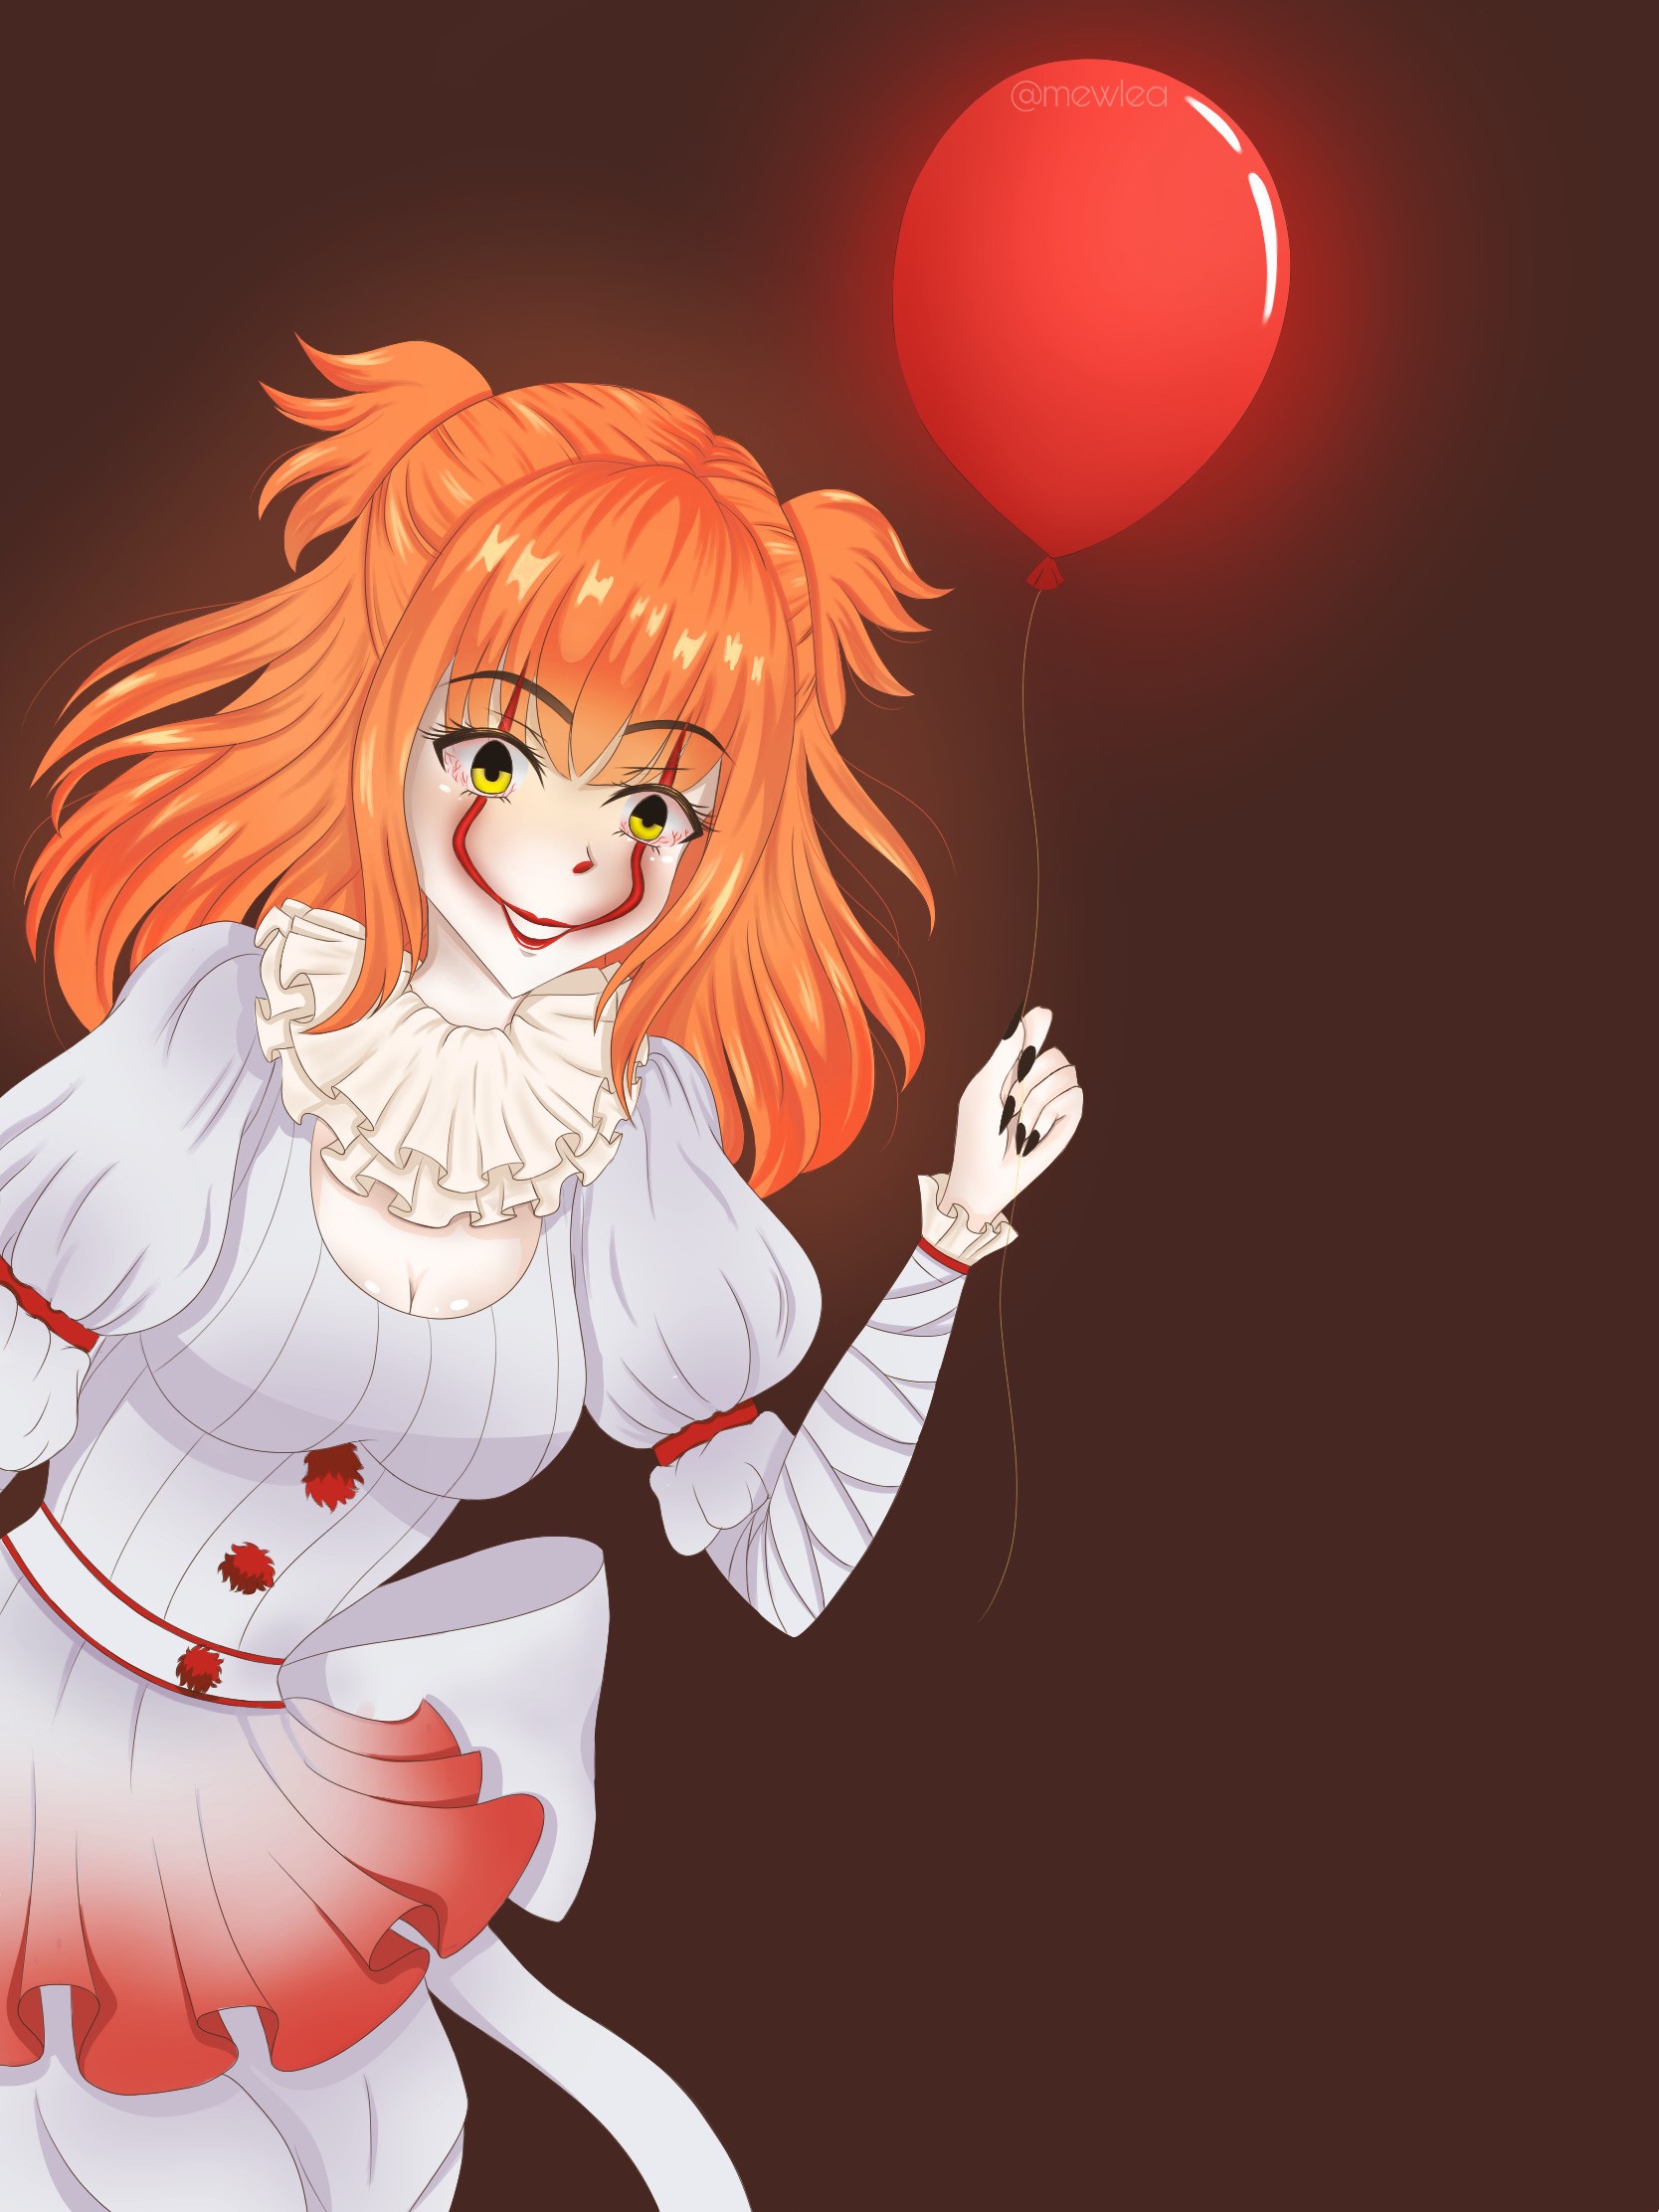 Pennywise by MewLea on DeviantArt